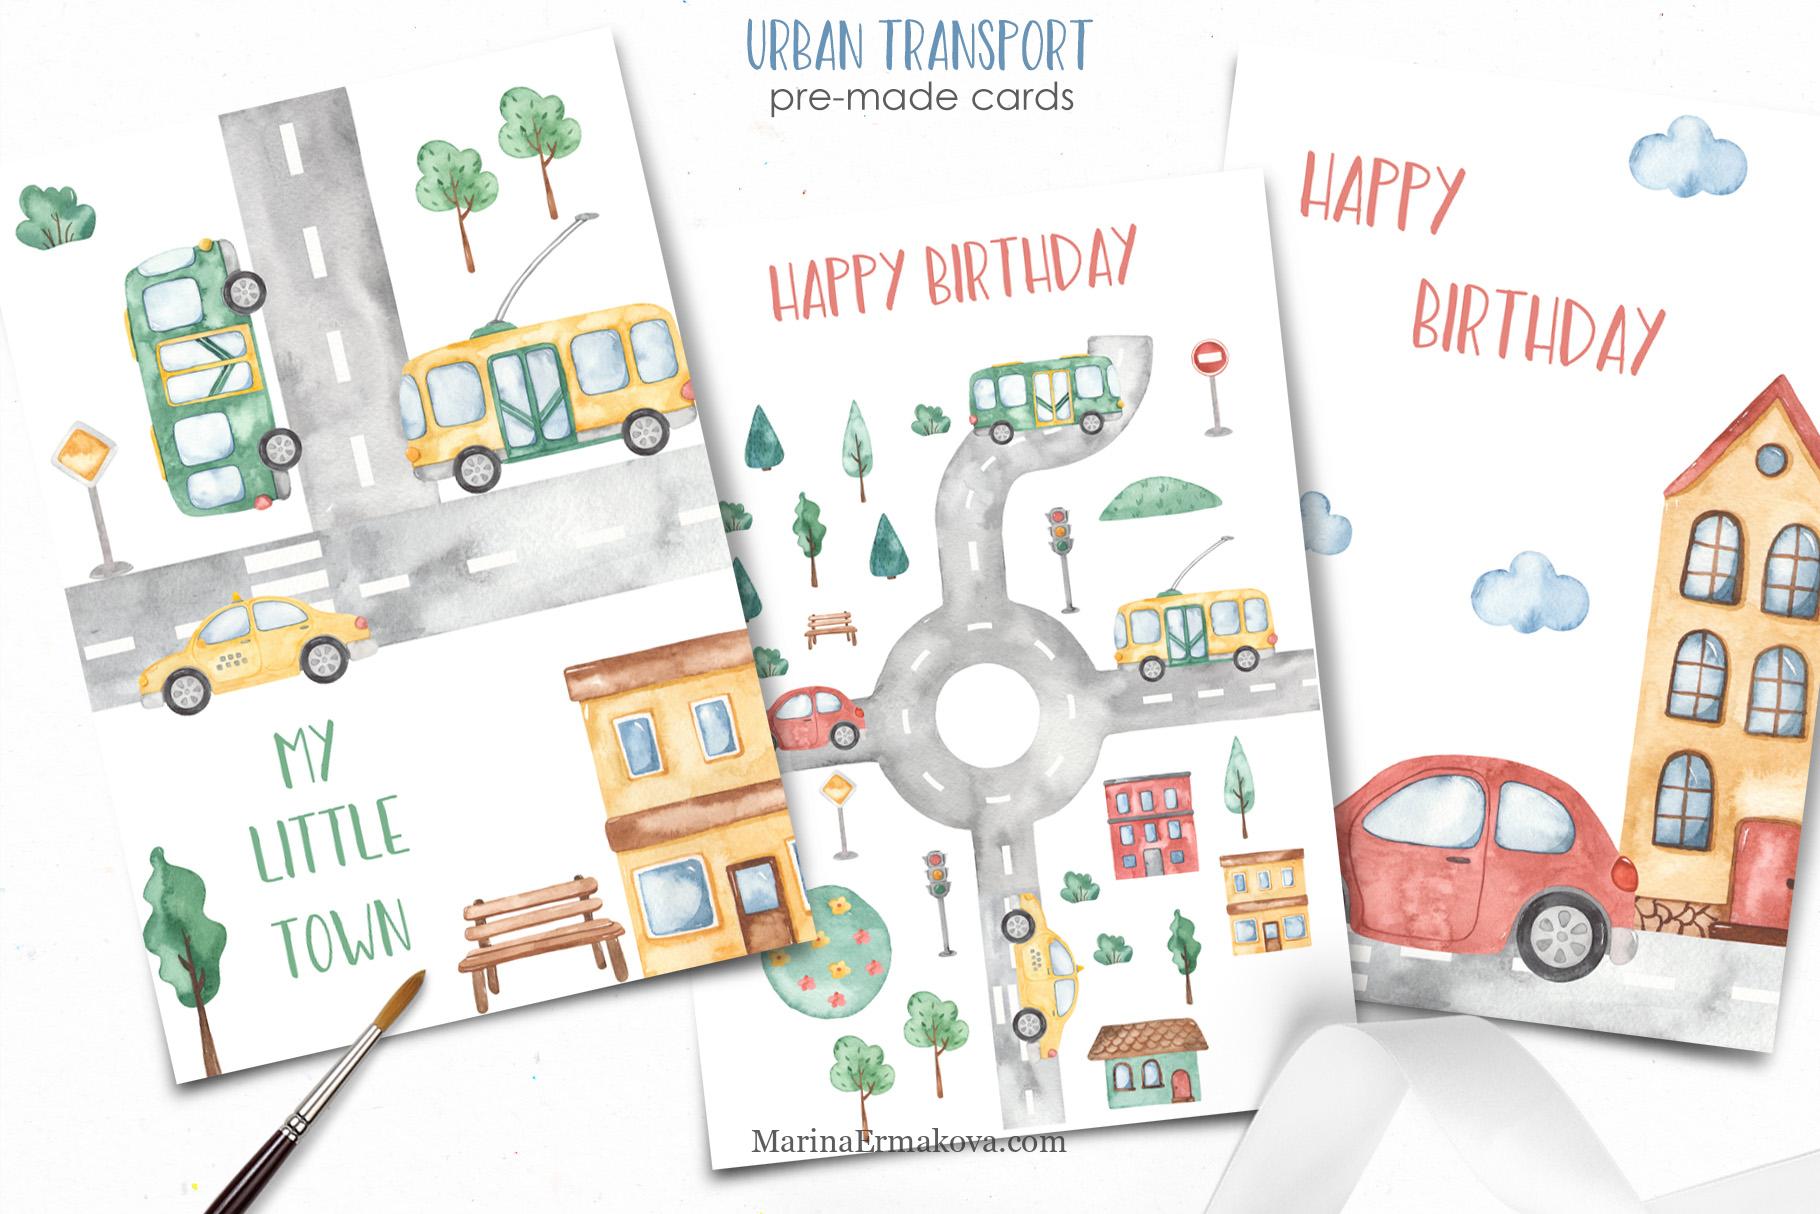 Diverse of cards with urban transports.